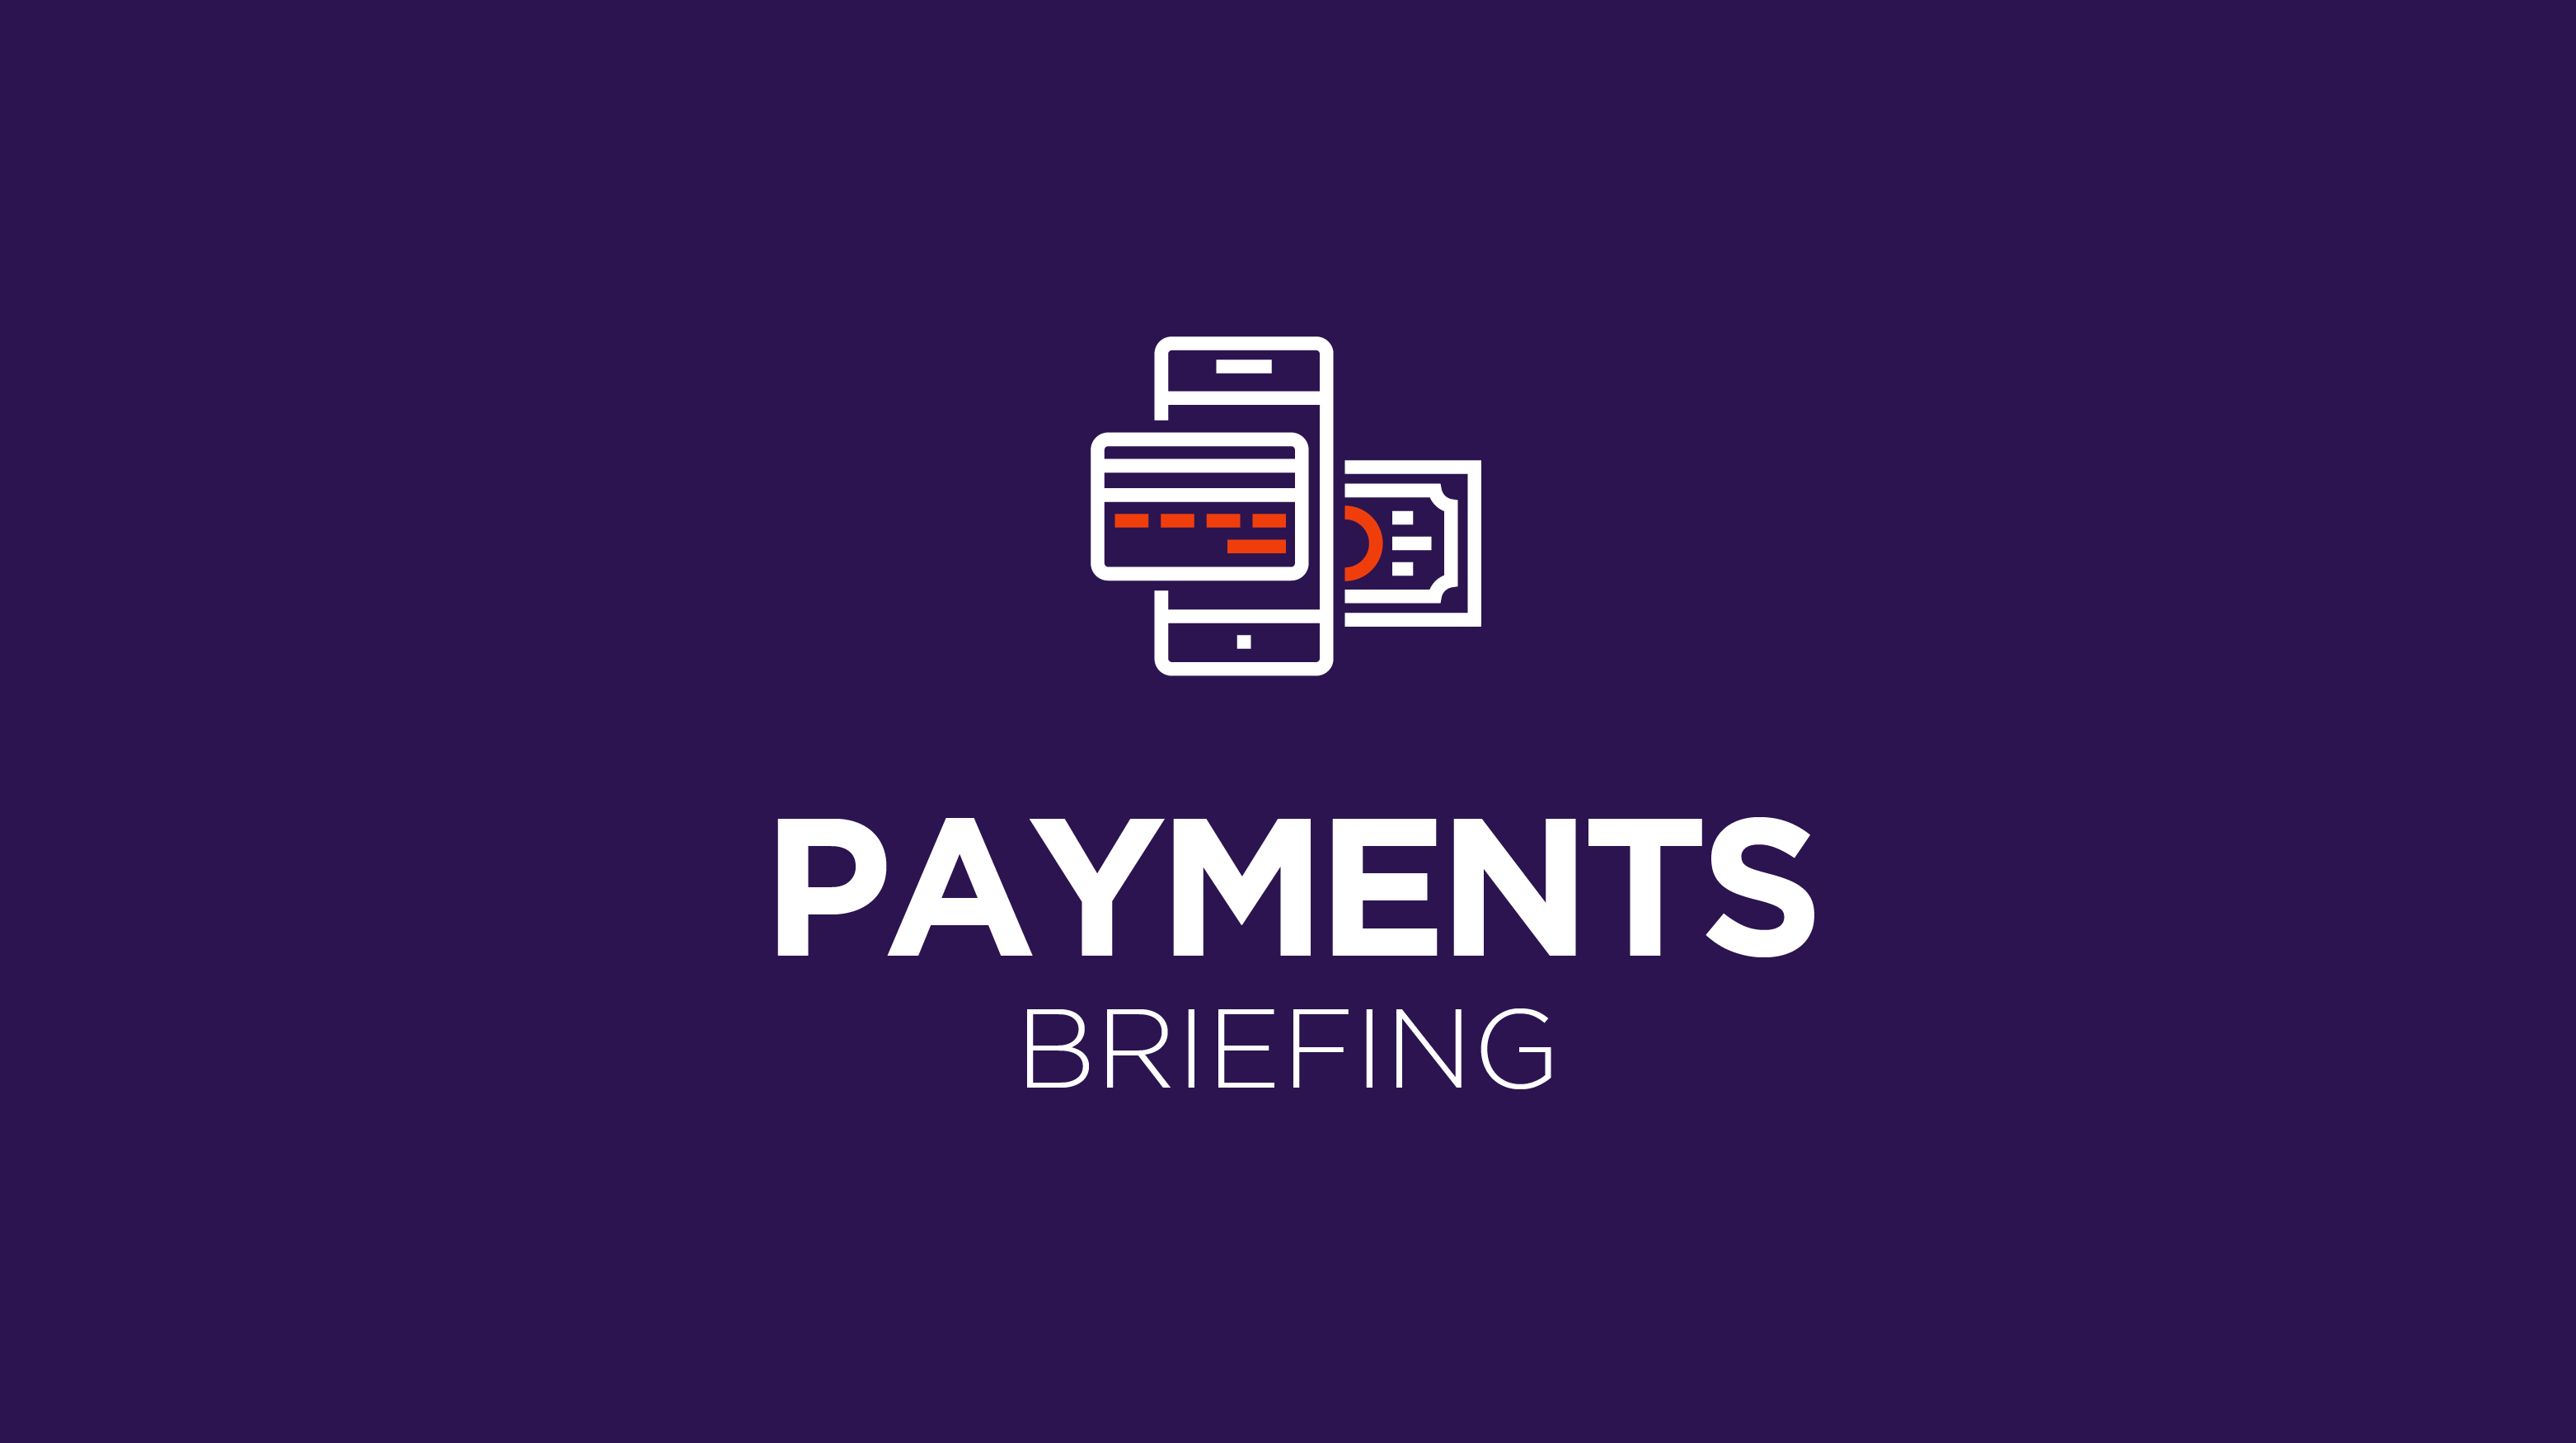 Payments Briefing: The opportunities and challenges of embedded payments